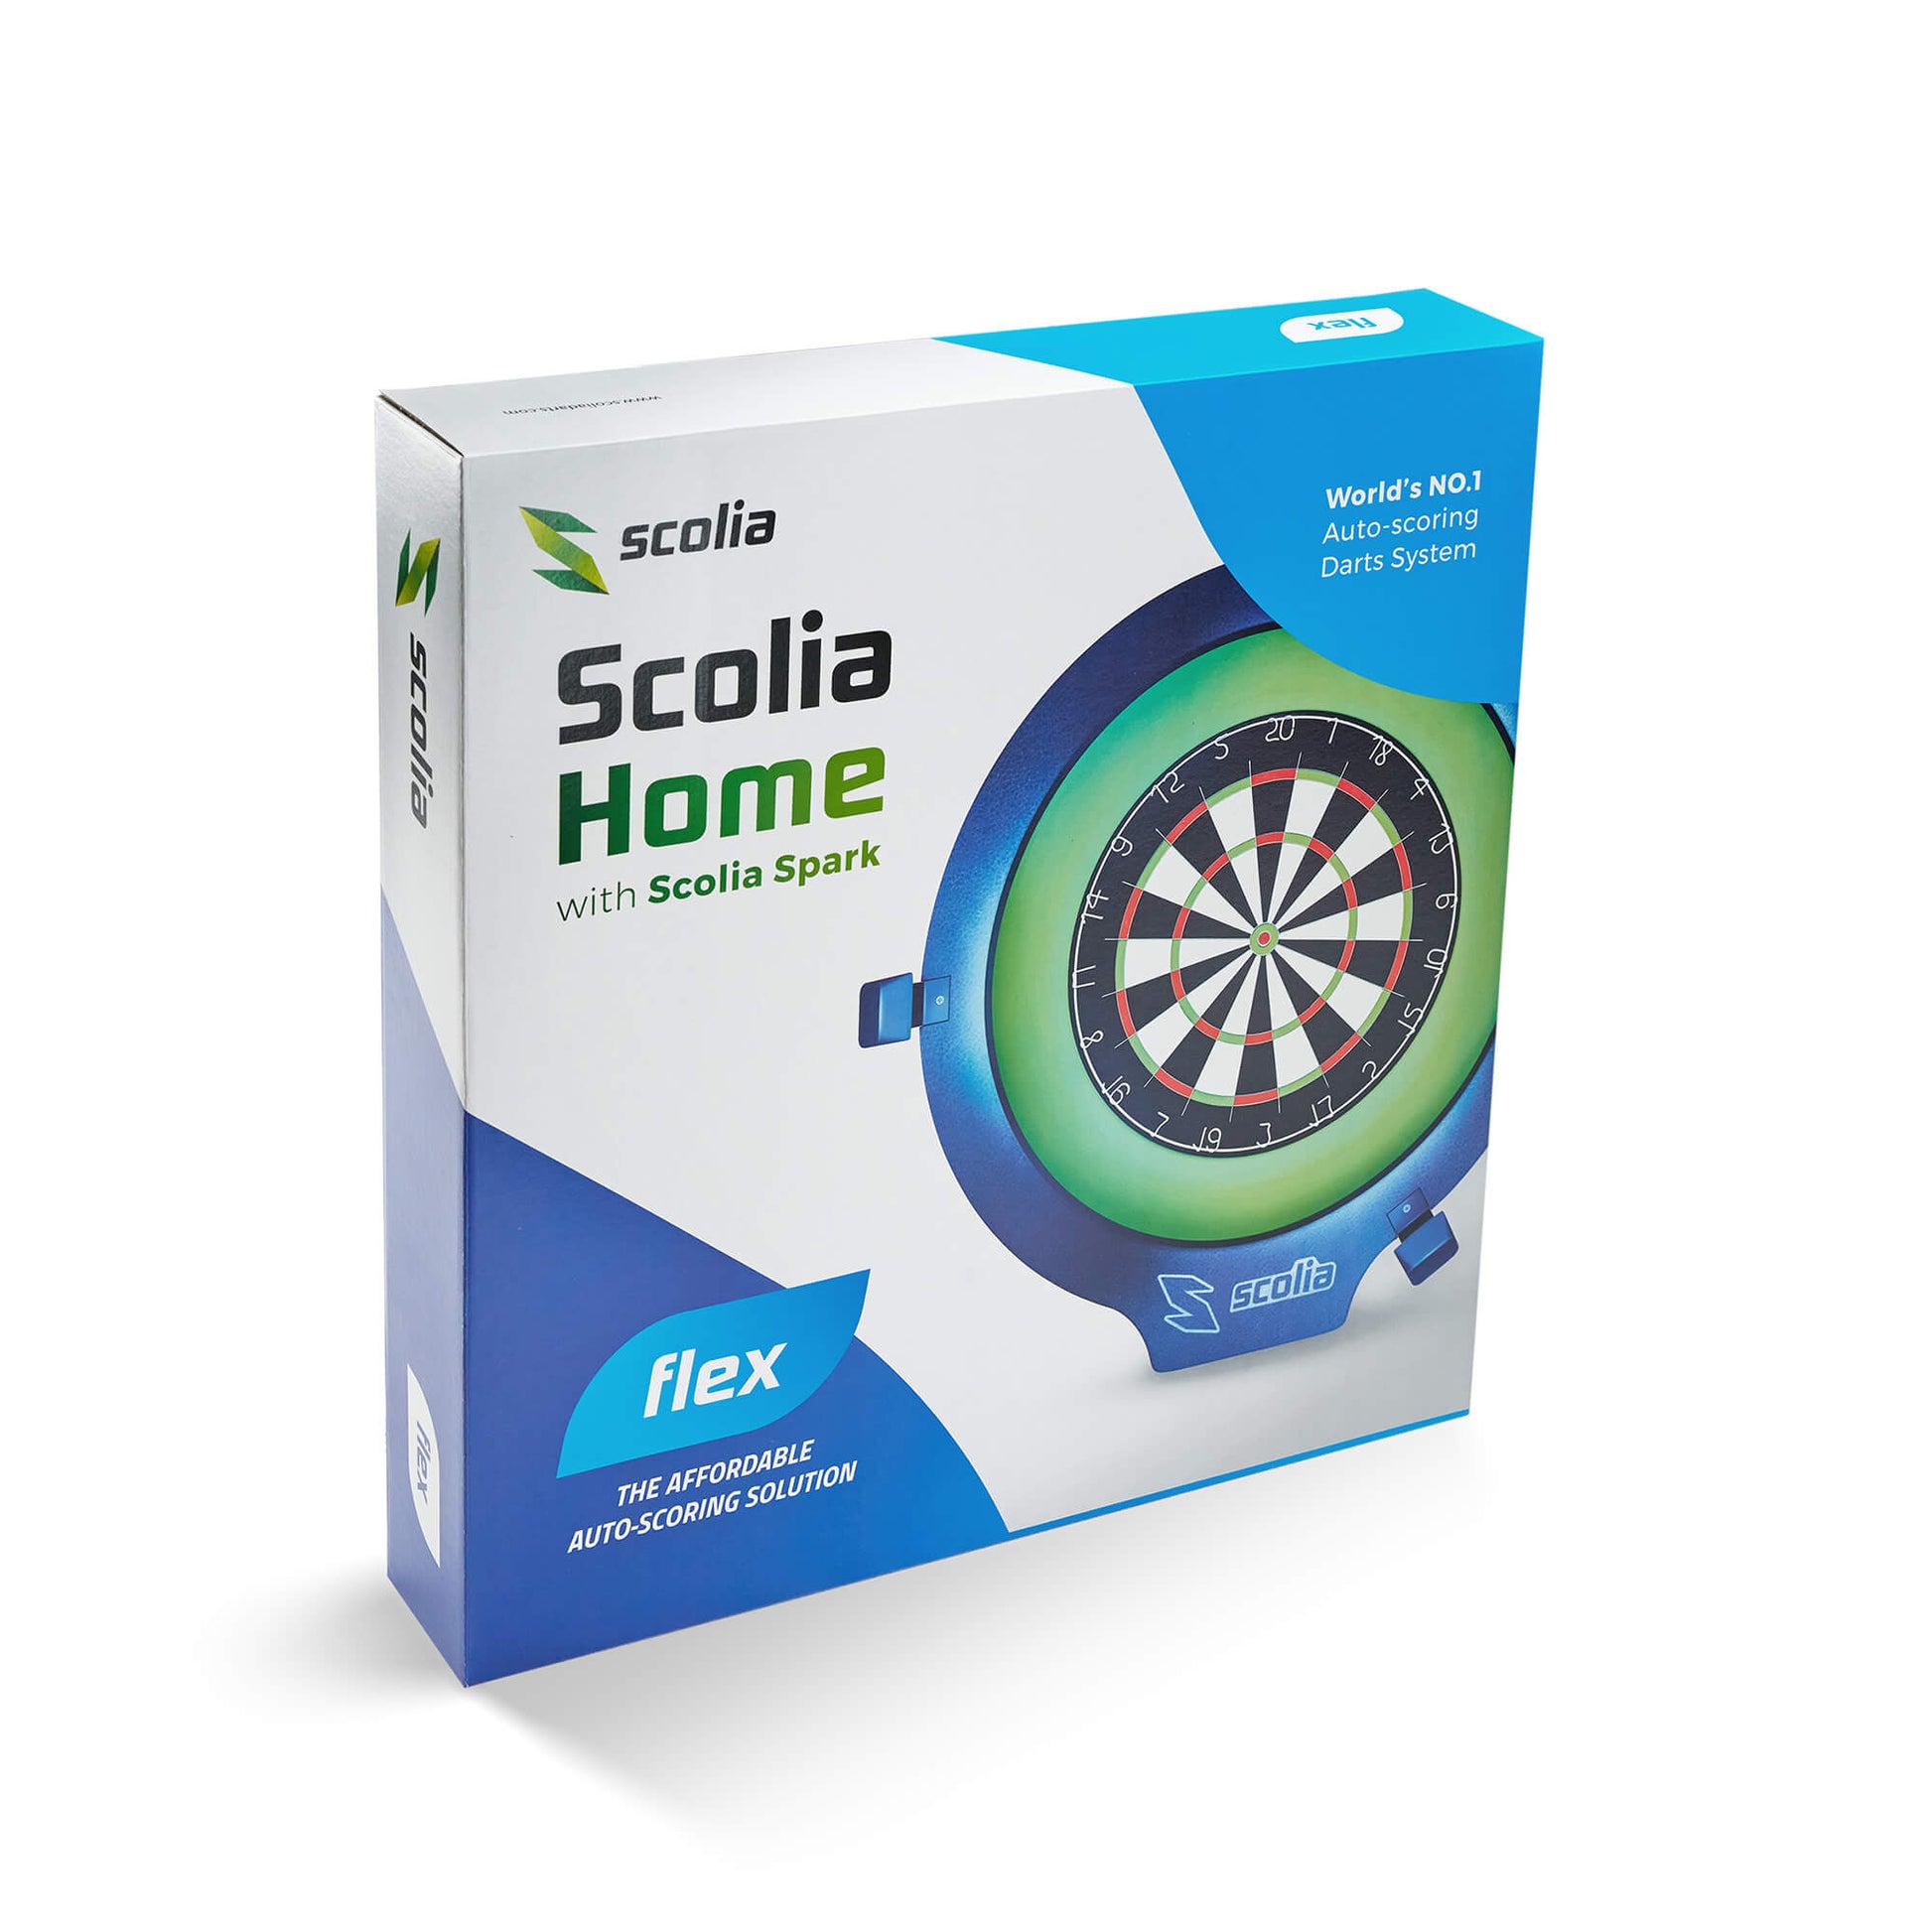 SCOLIA - HOME FLEX' - TERMOTE LIGHT - AUTOMATIC SCORING WITH ONLINE PLAY!